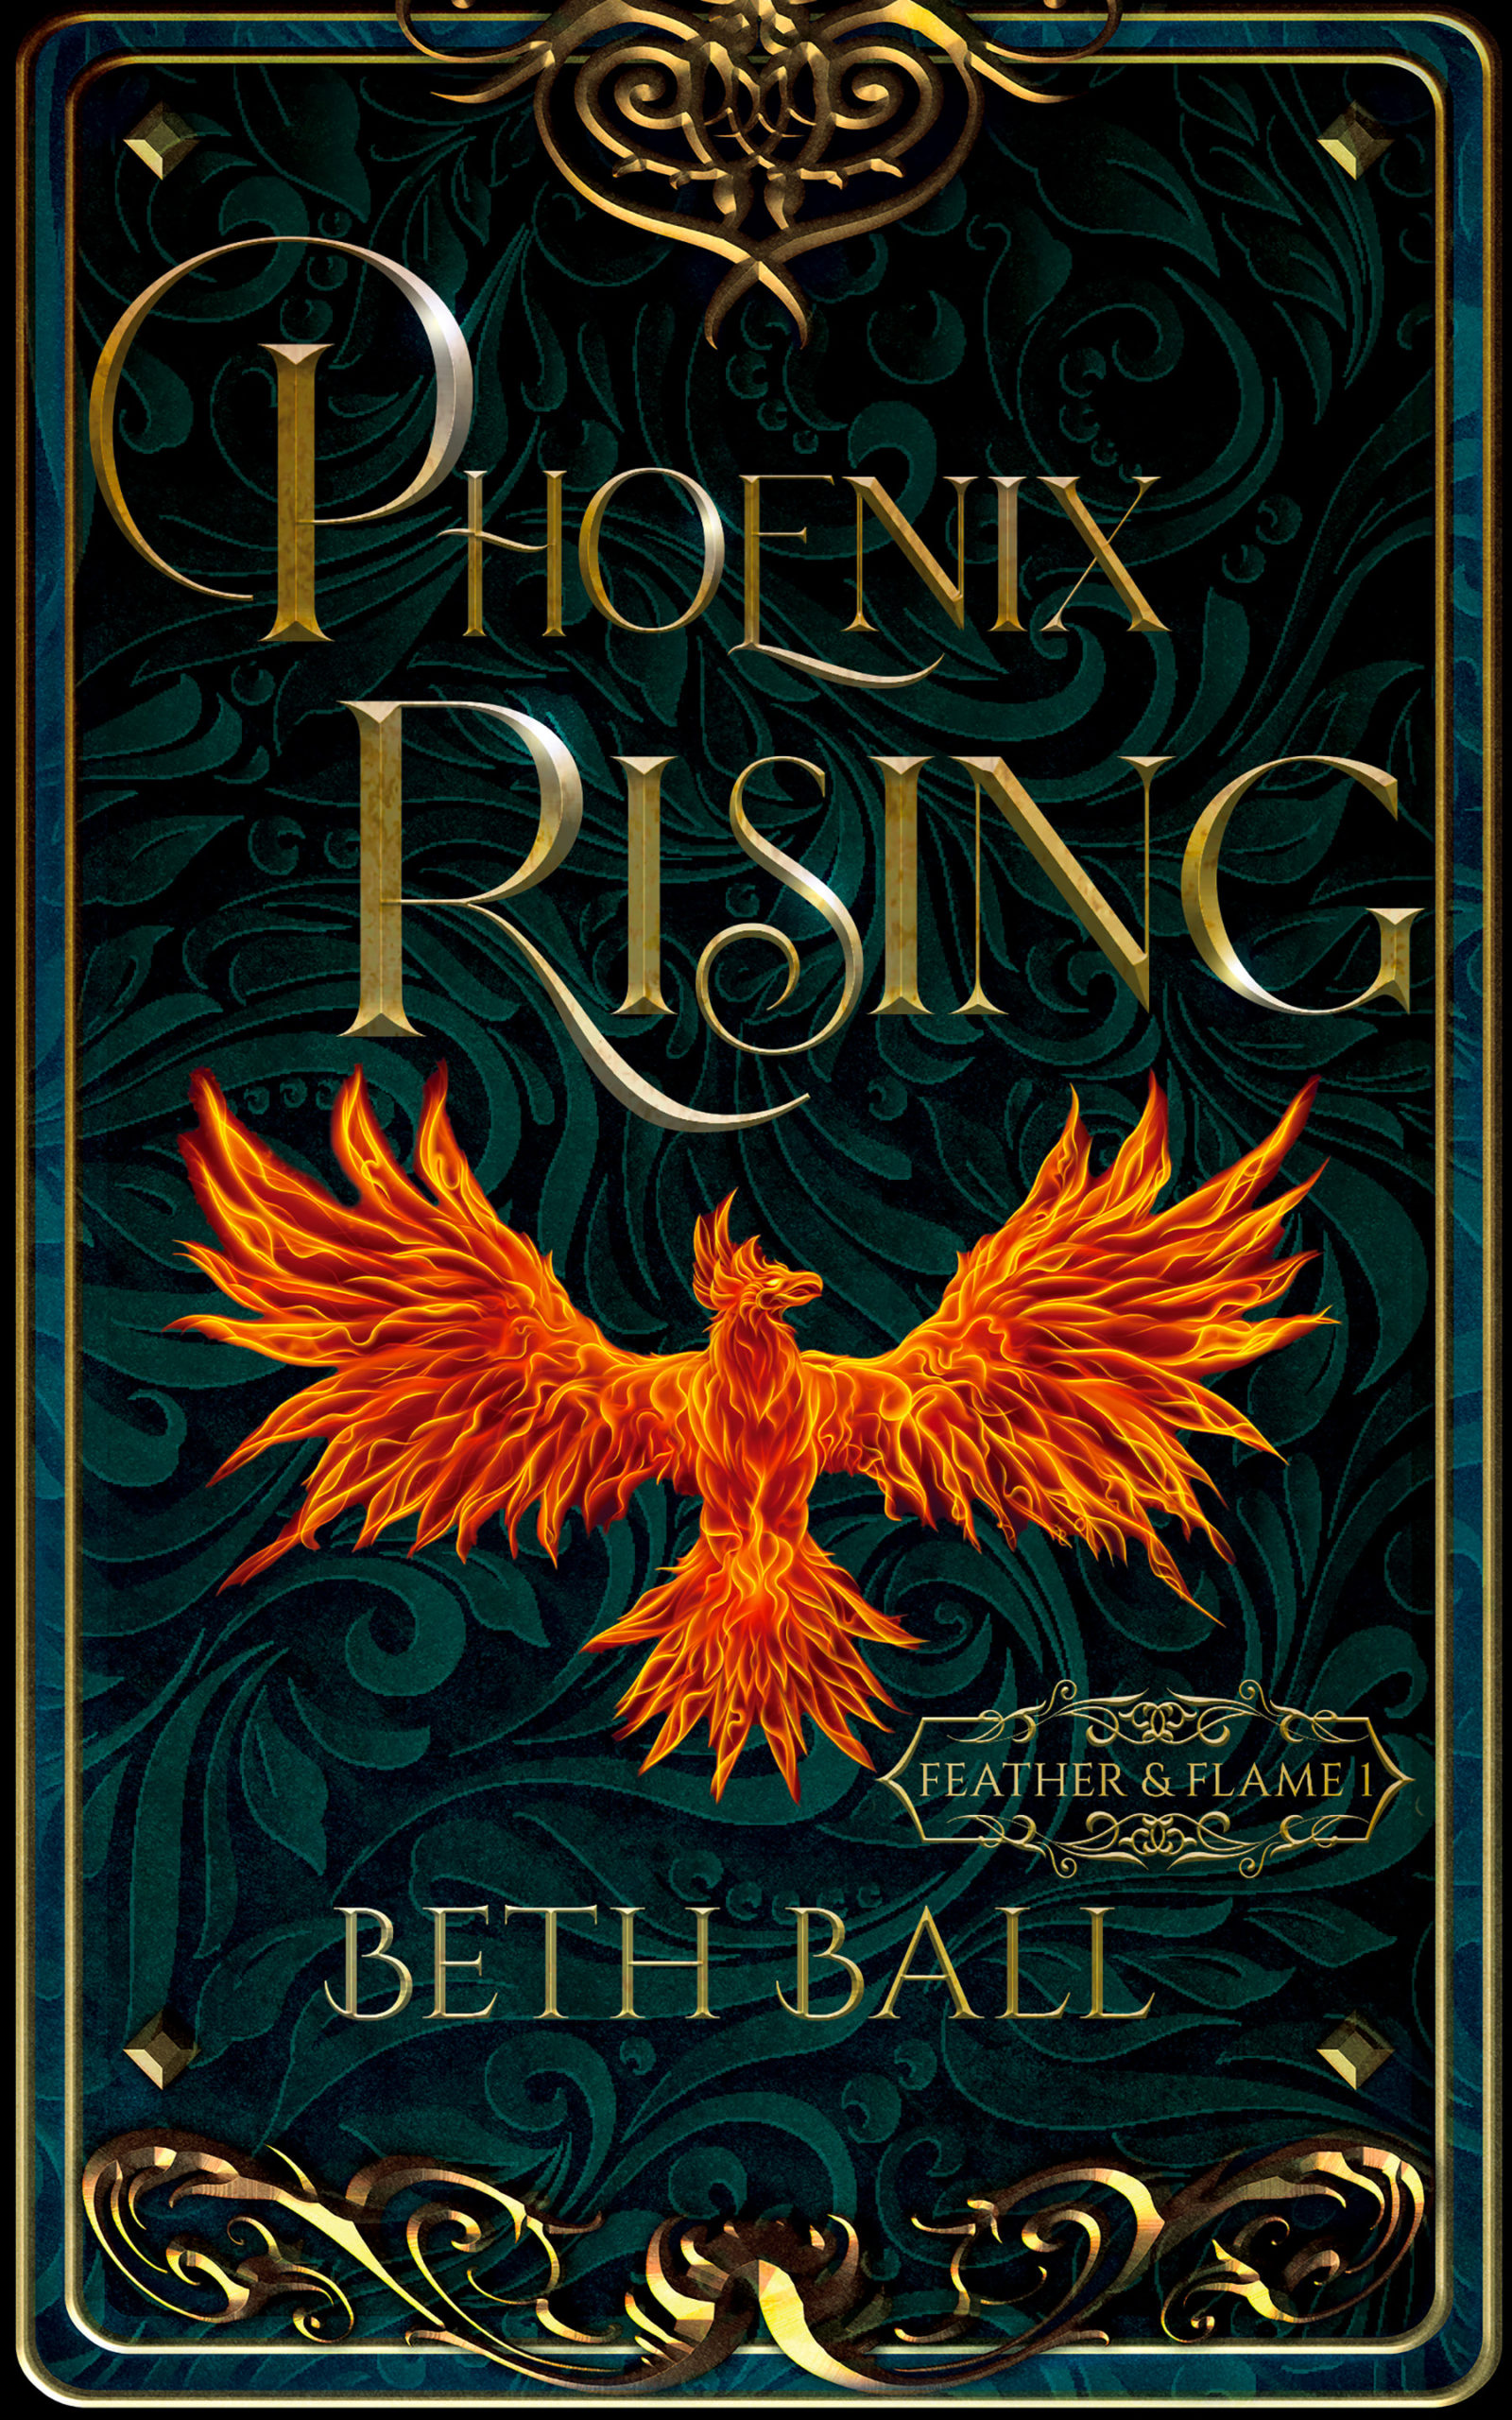 Phoenix Rising: Feather & Flame Book 1